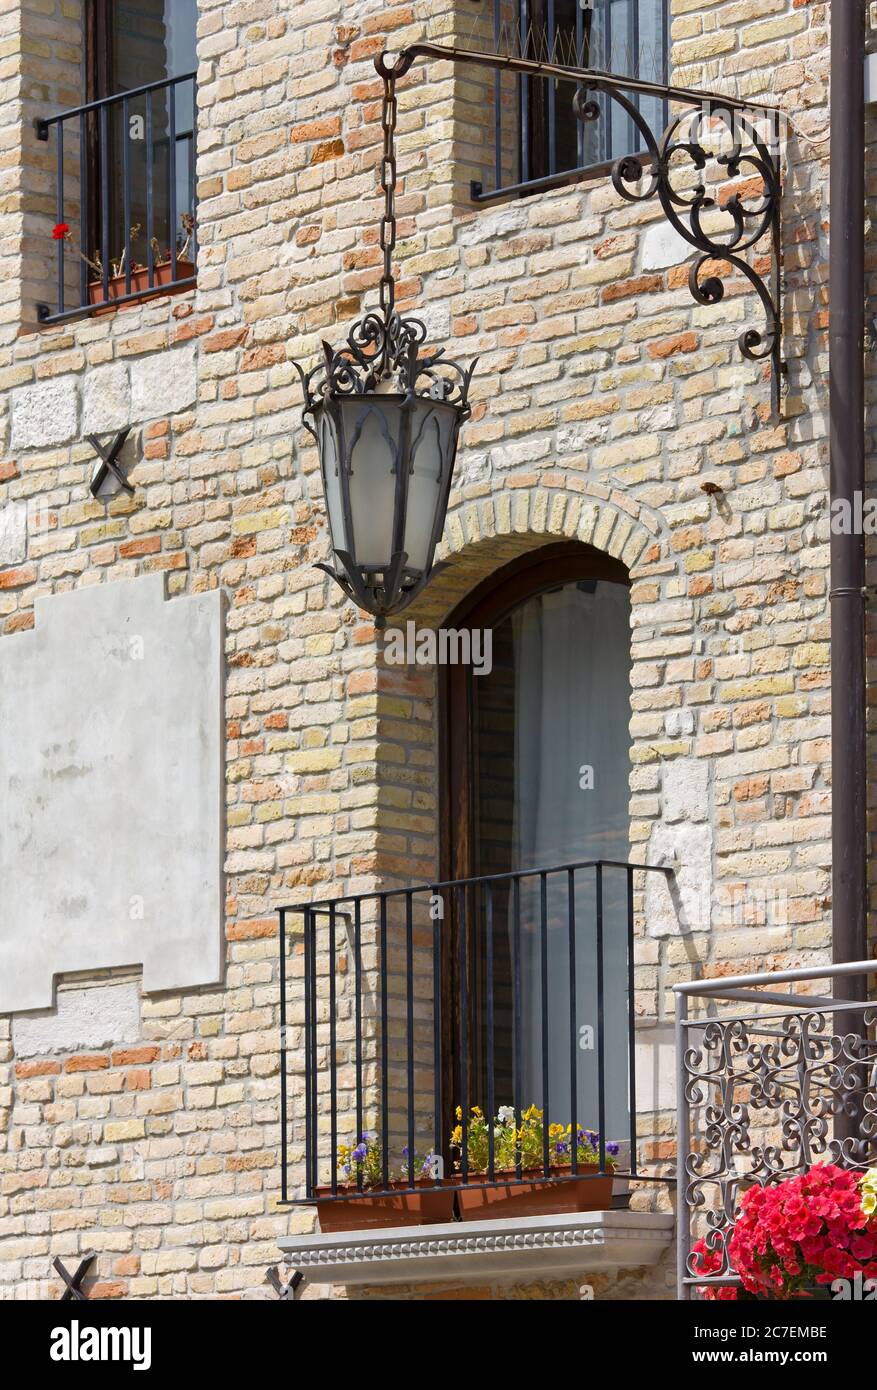 MARANO LAGUNARE, Italy - June 9, 2013: Close-up of the facade of a perfectly renovated historic building Stock Photo